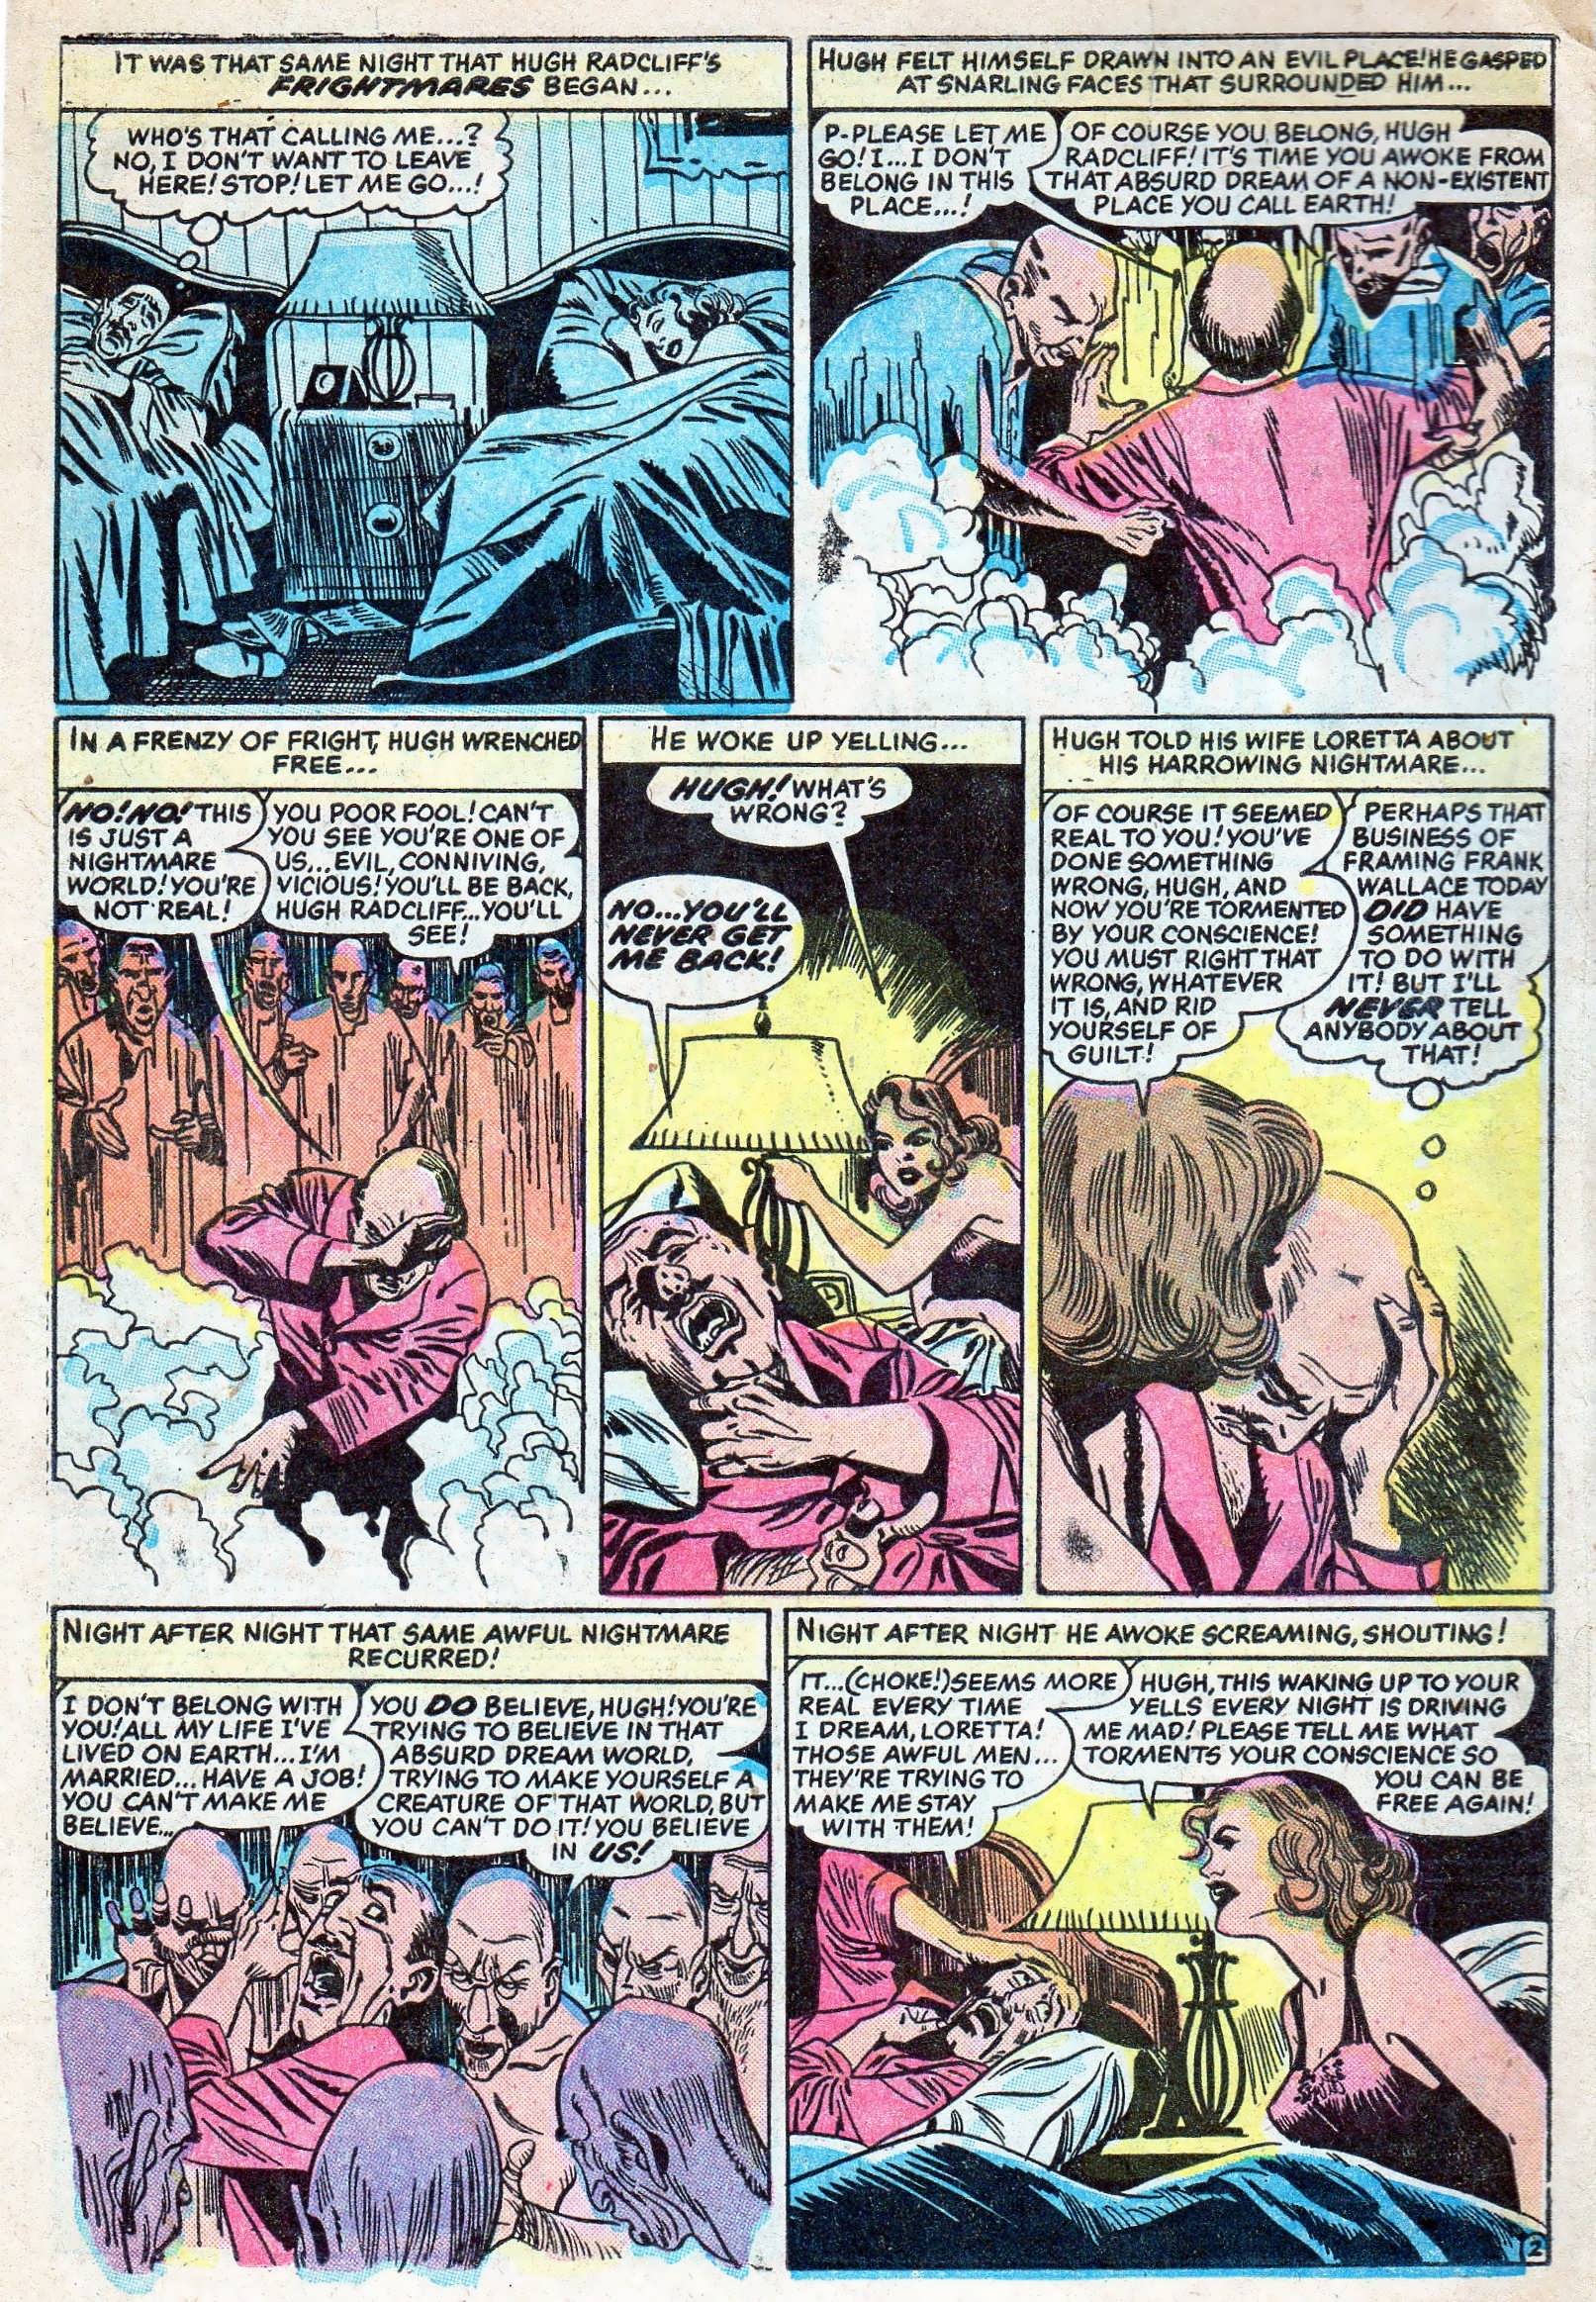 Marvel Tales (1949) 159 Page 3